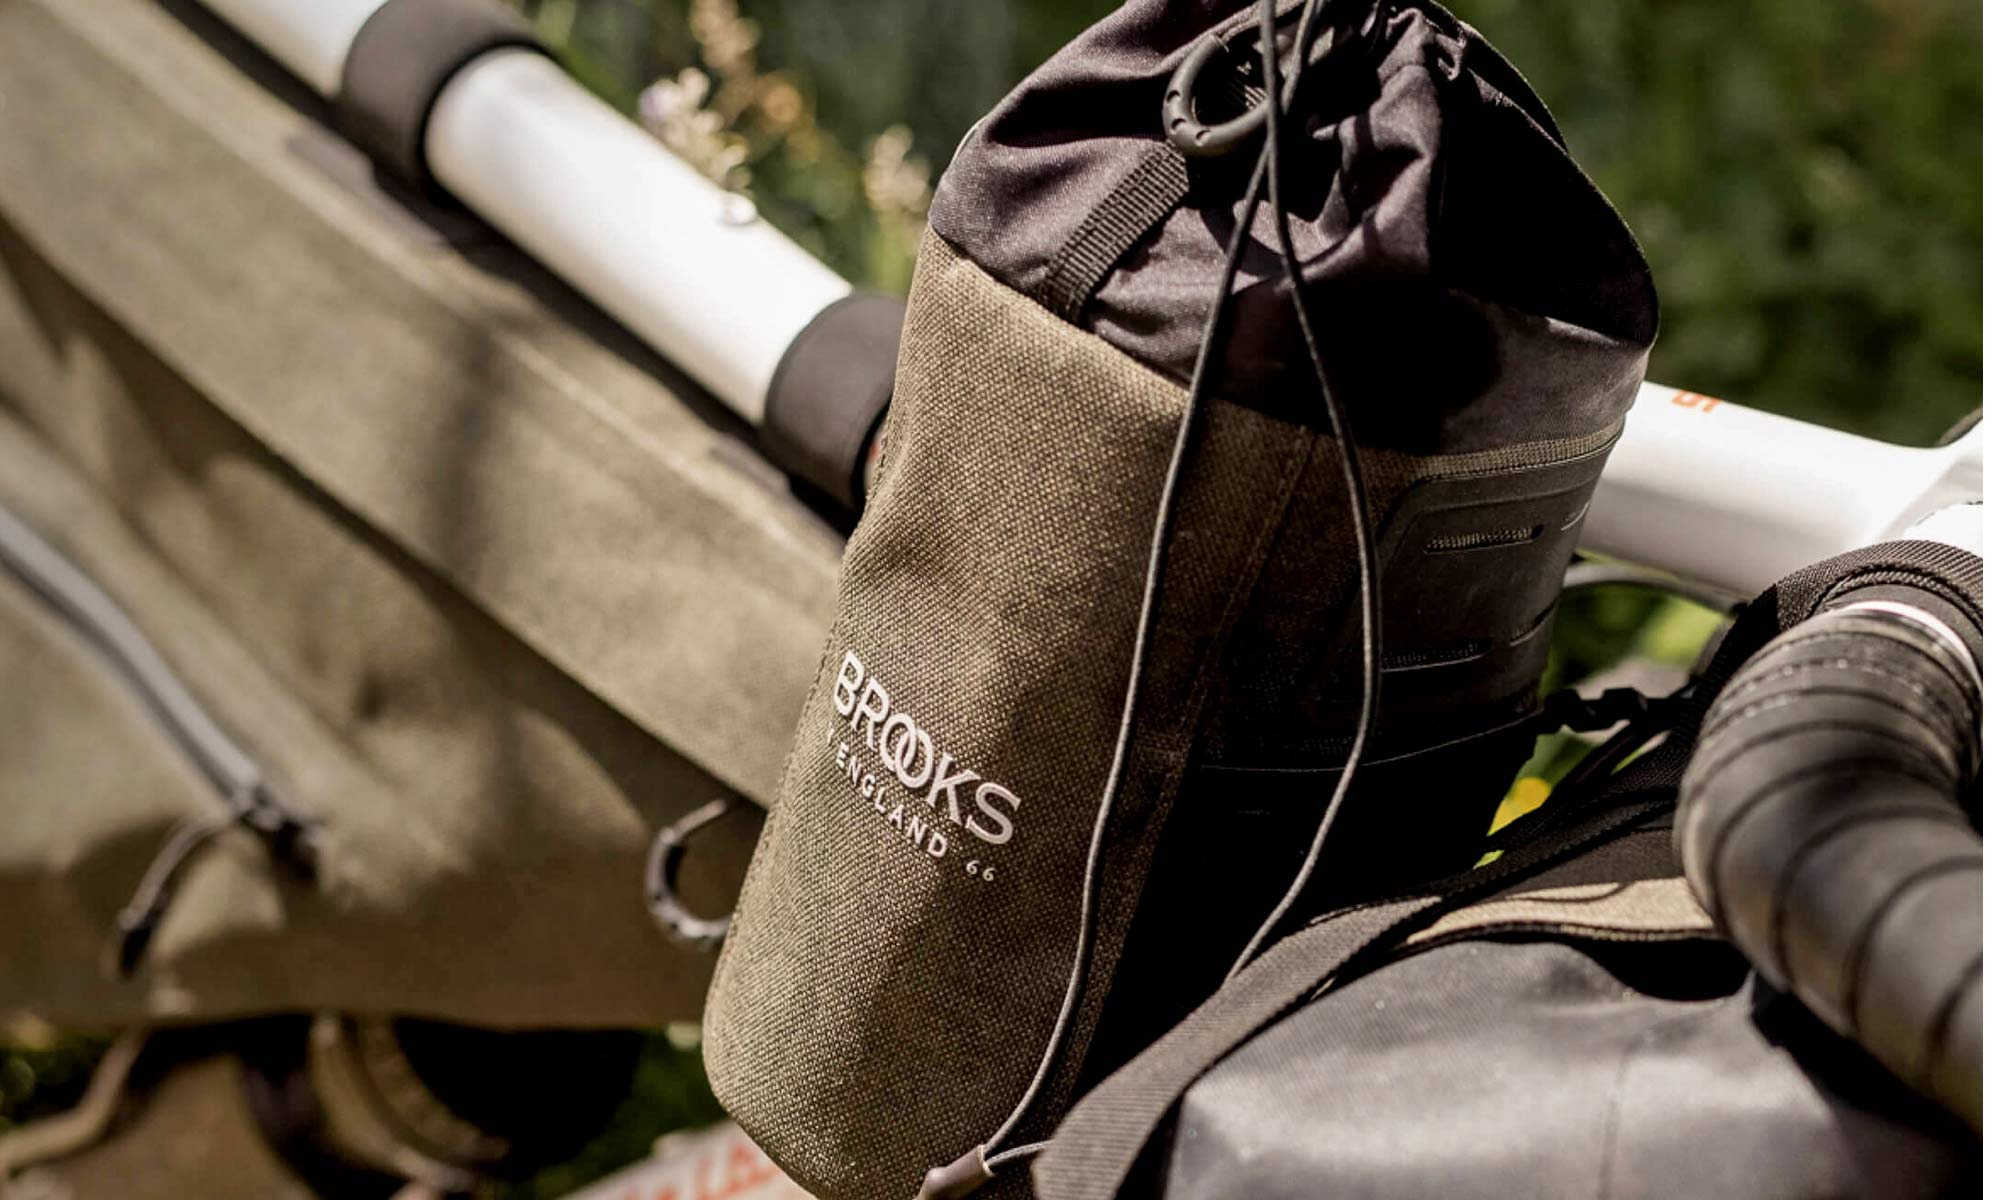 Brooks England Scape bikepacking bike touring packs, Feed Pouch detail